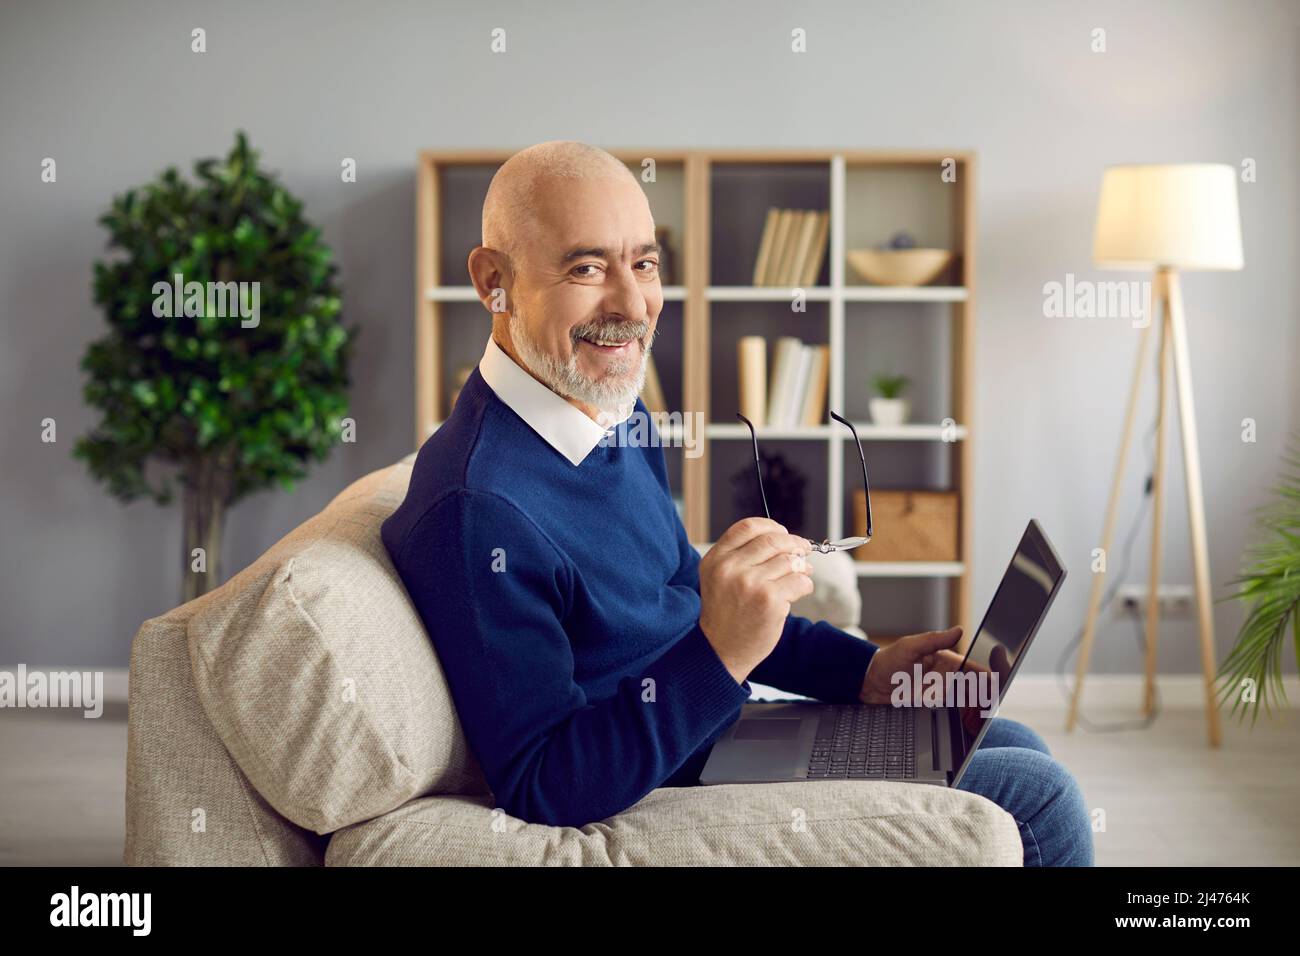 Happy, smiling senior man sitting on couch at home and using his laptop computer Stock Photo